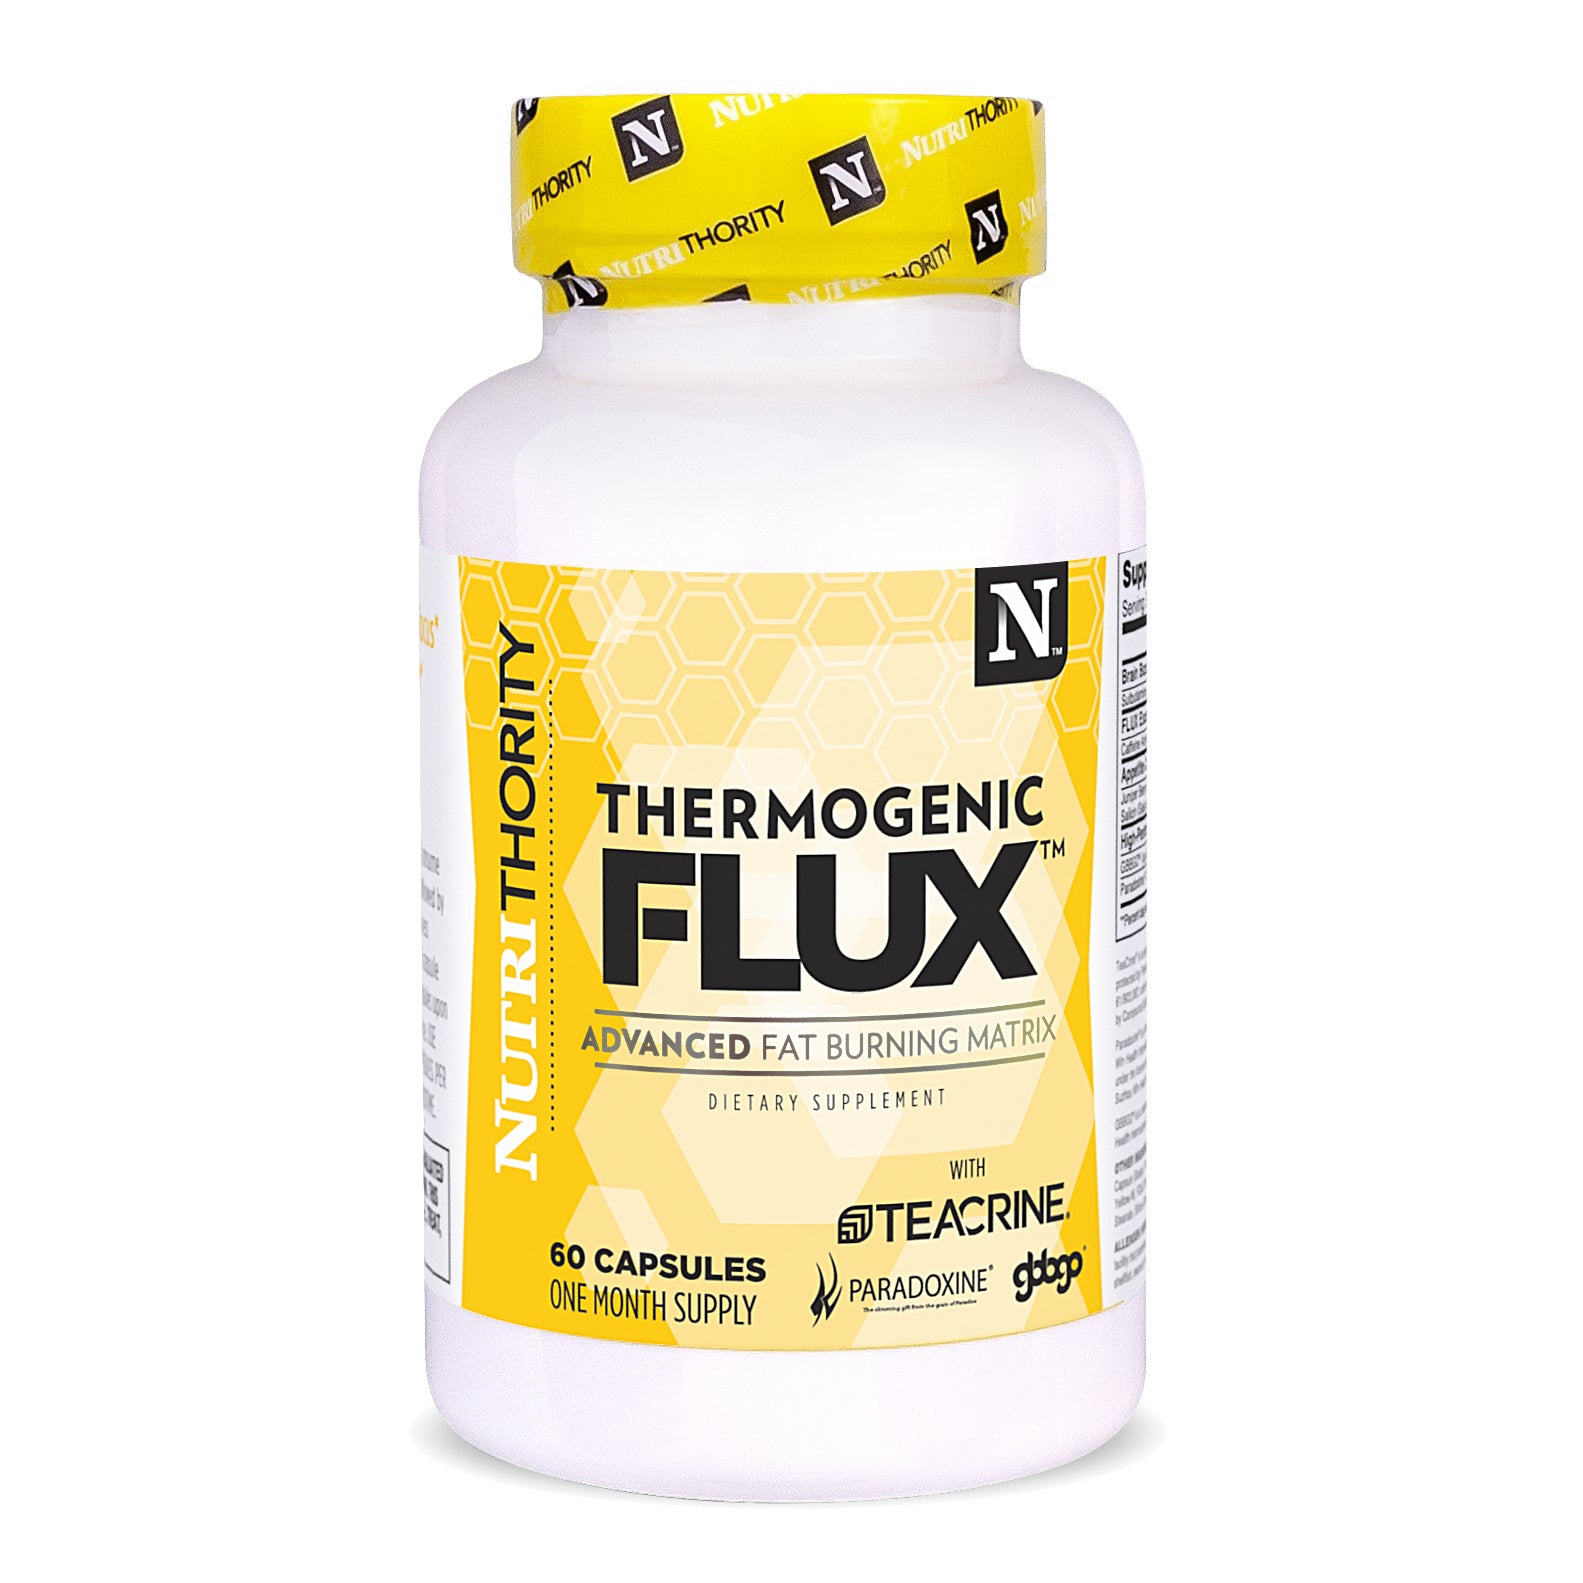 Thermogenic supplements for increased focus